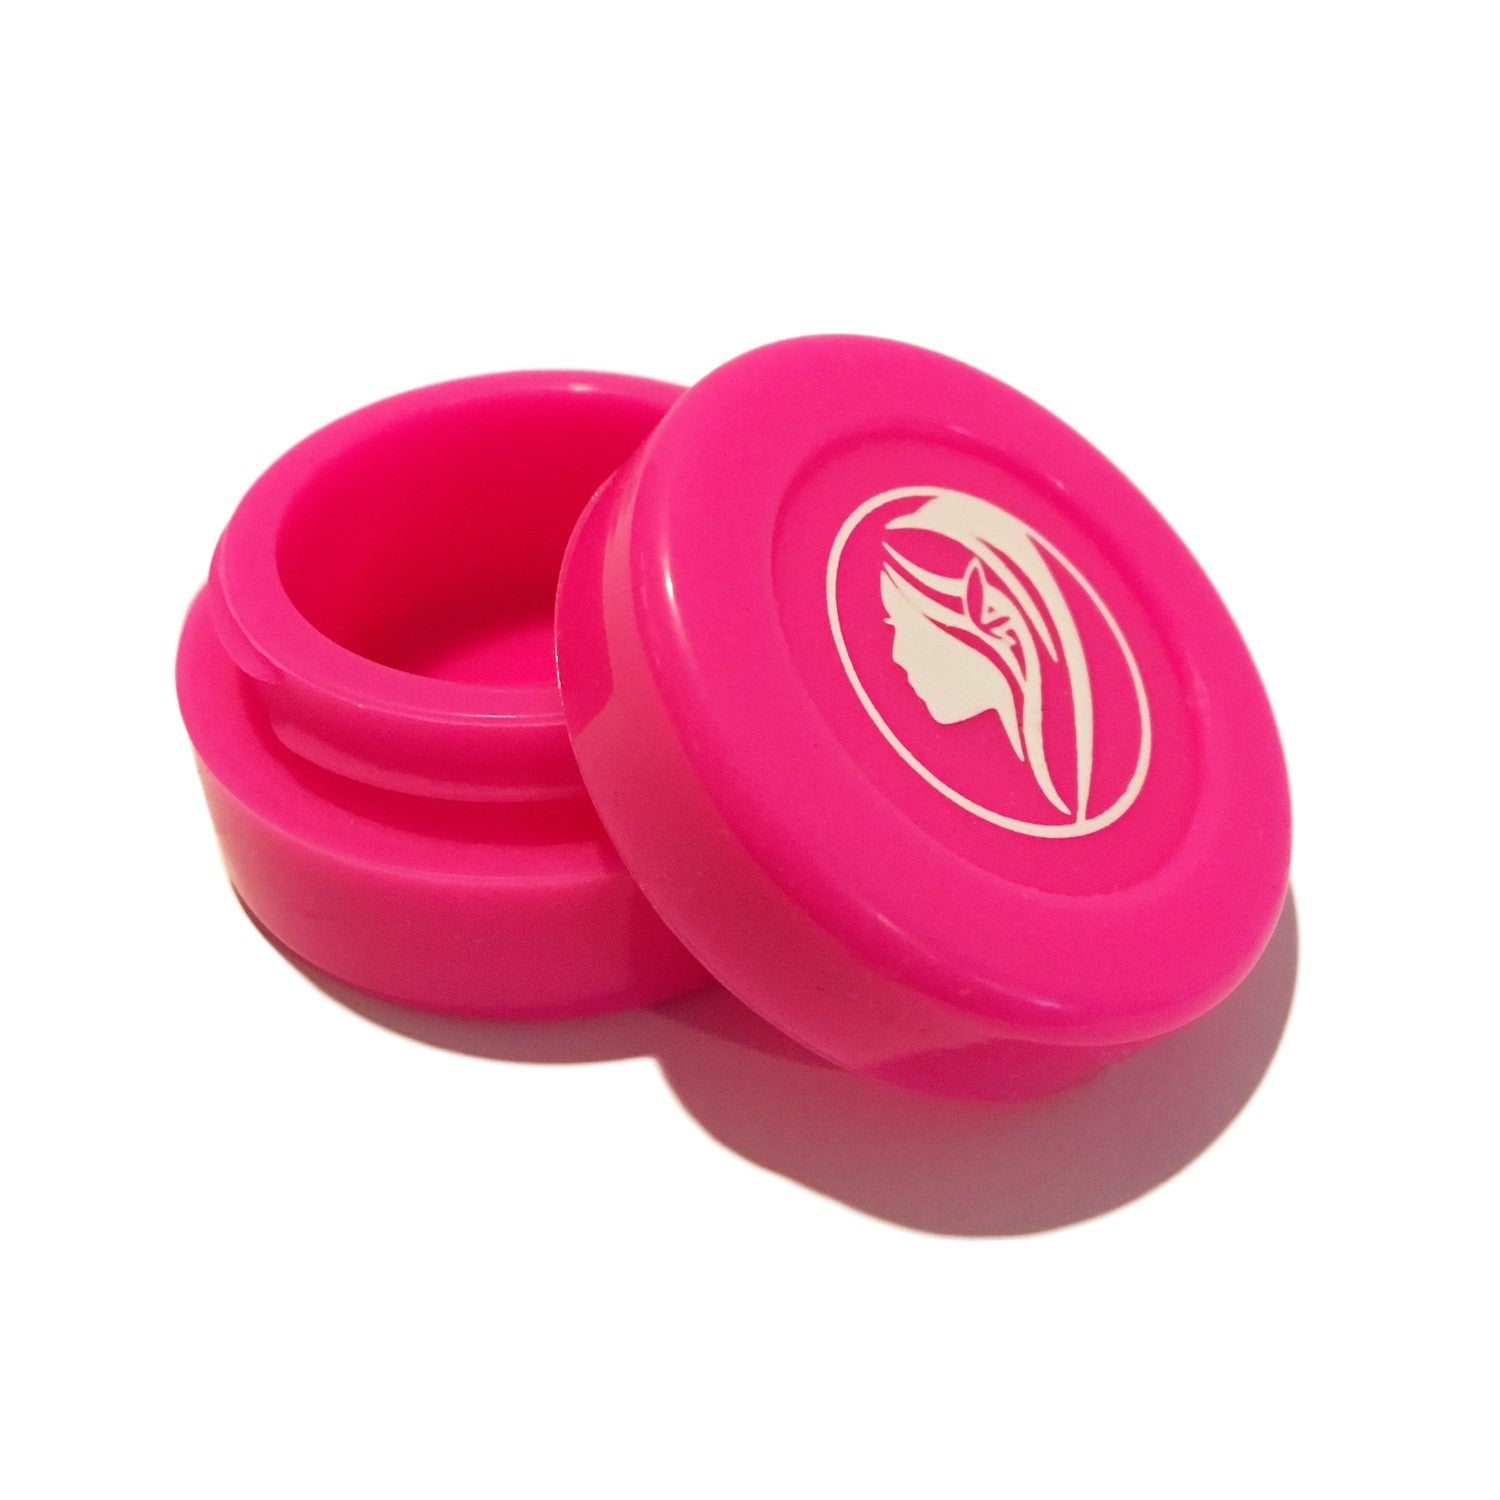 Non-Stick Silicone Wax Jar - Pink - Quonset Hut